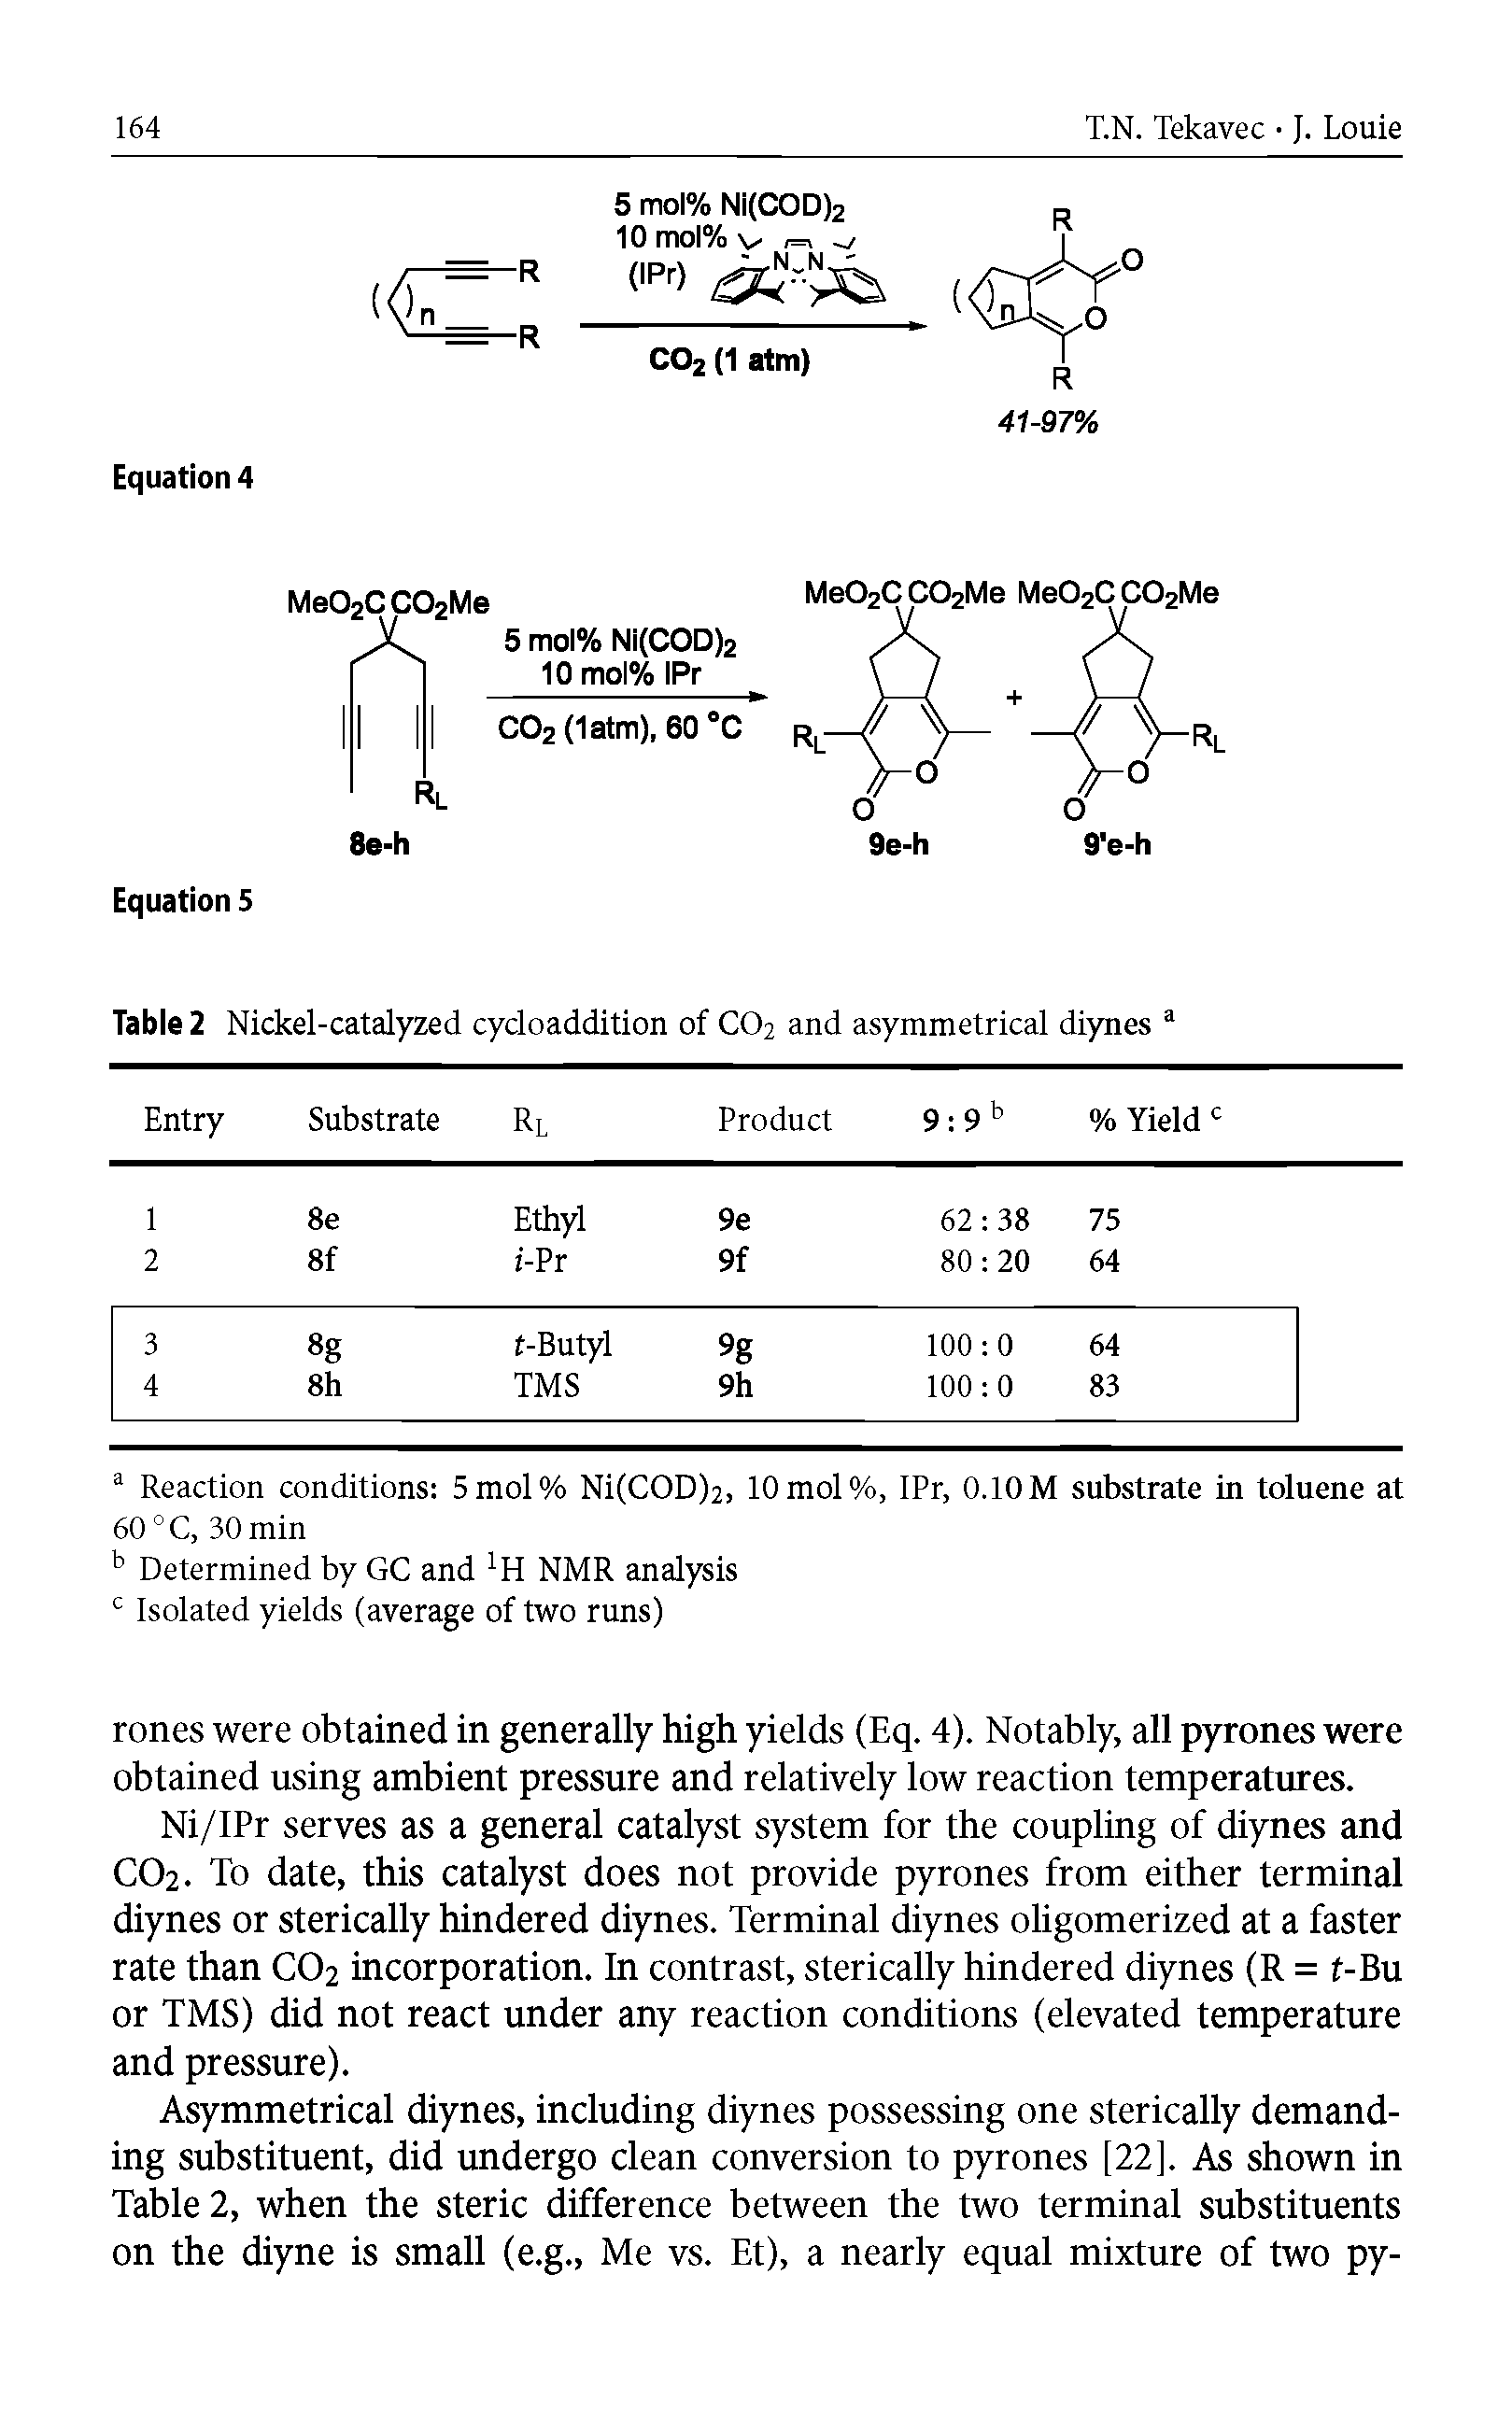 Table 2 Nickel-catalyzed cycloaddition of C02 and asymmetrical diynes...